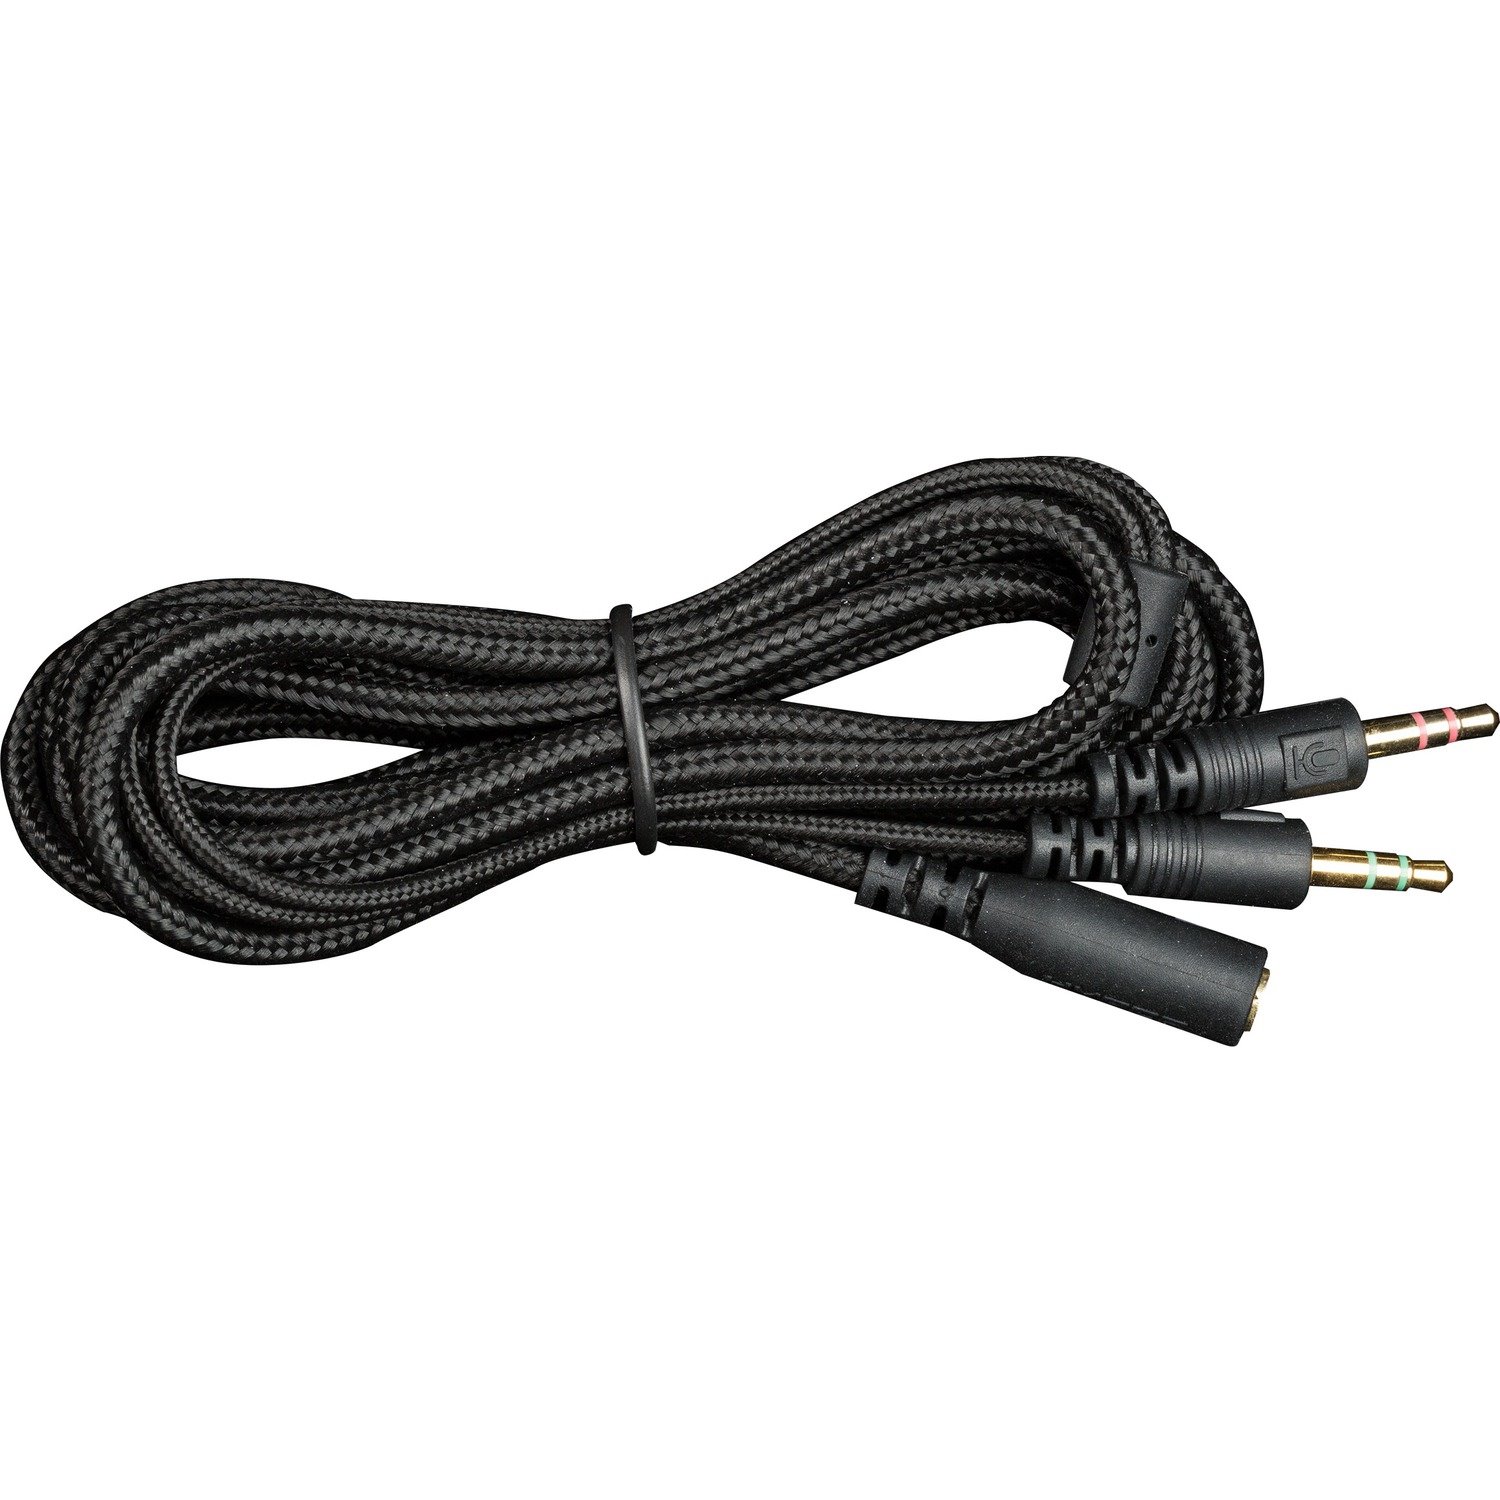 HyperX 2 m Mini-phone Audio Cable for PC, Headset, Audio Device